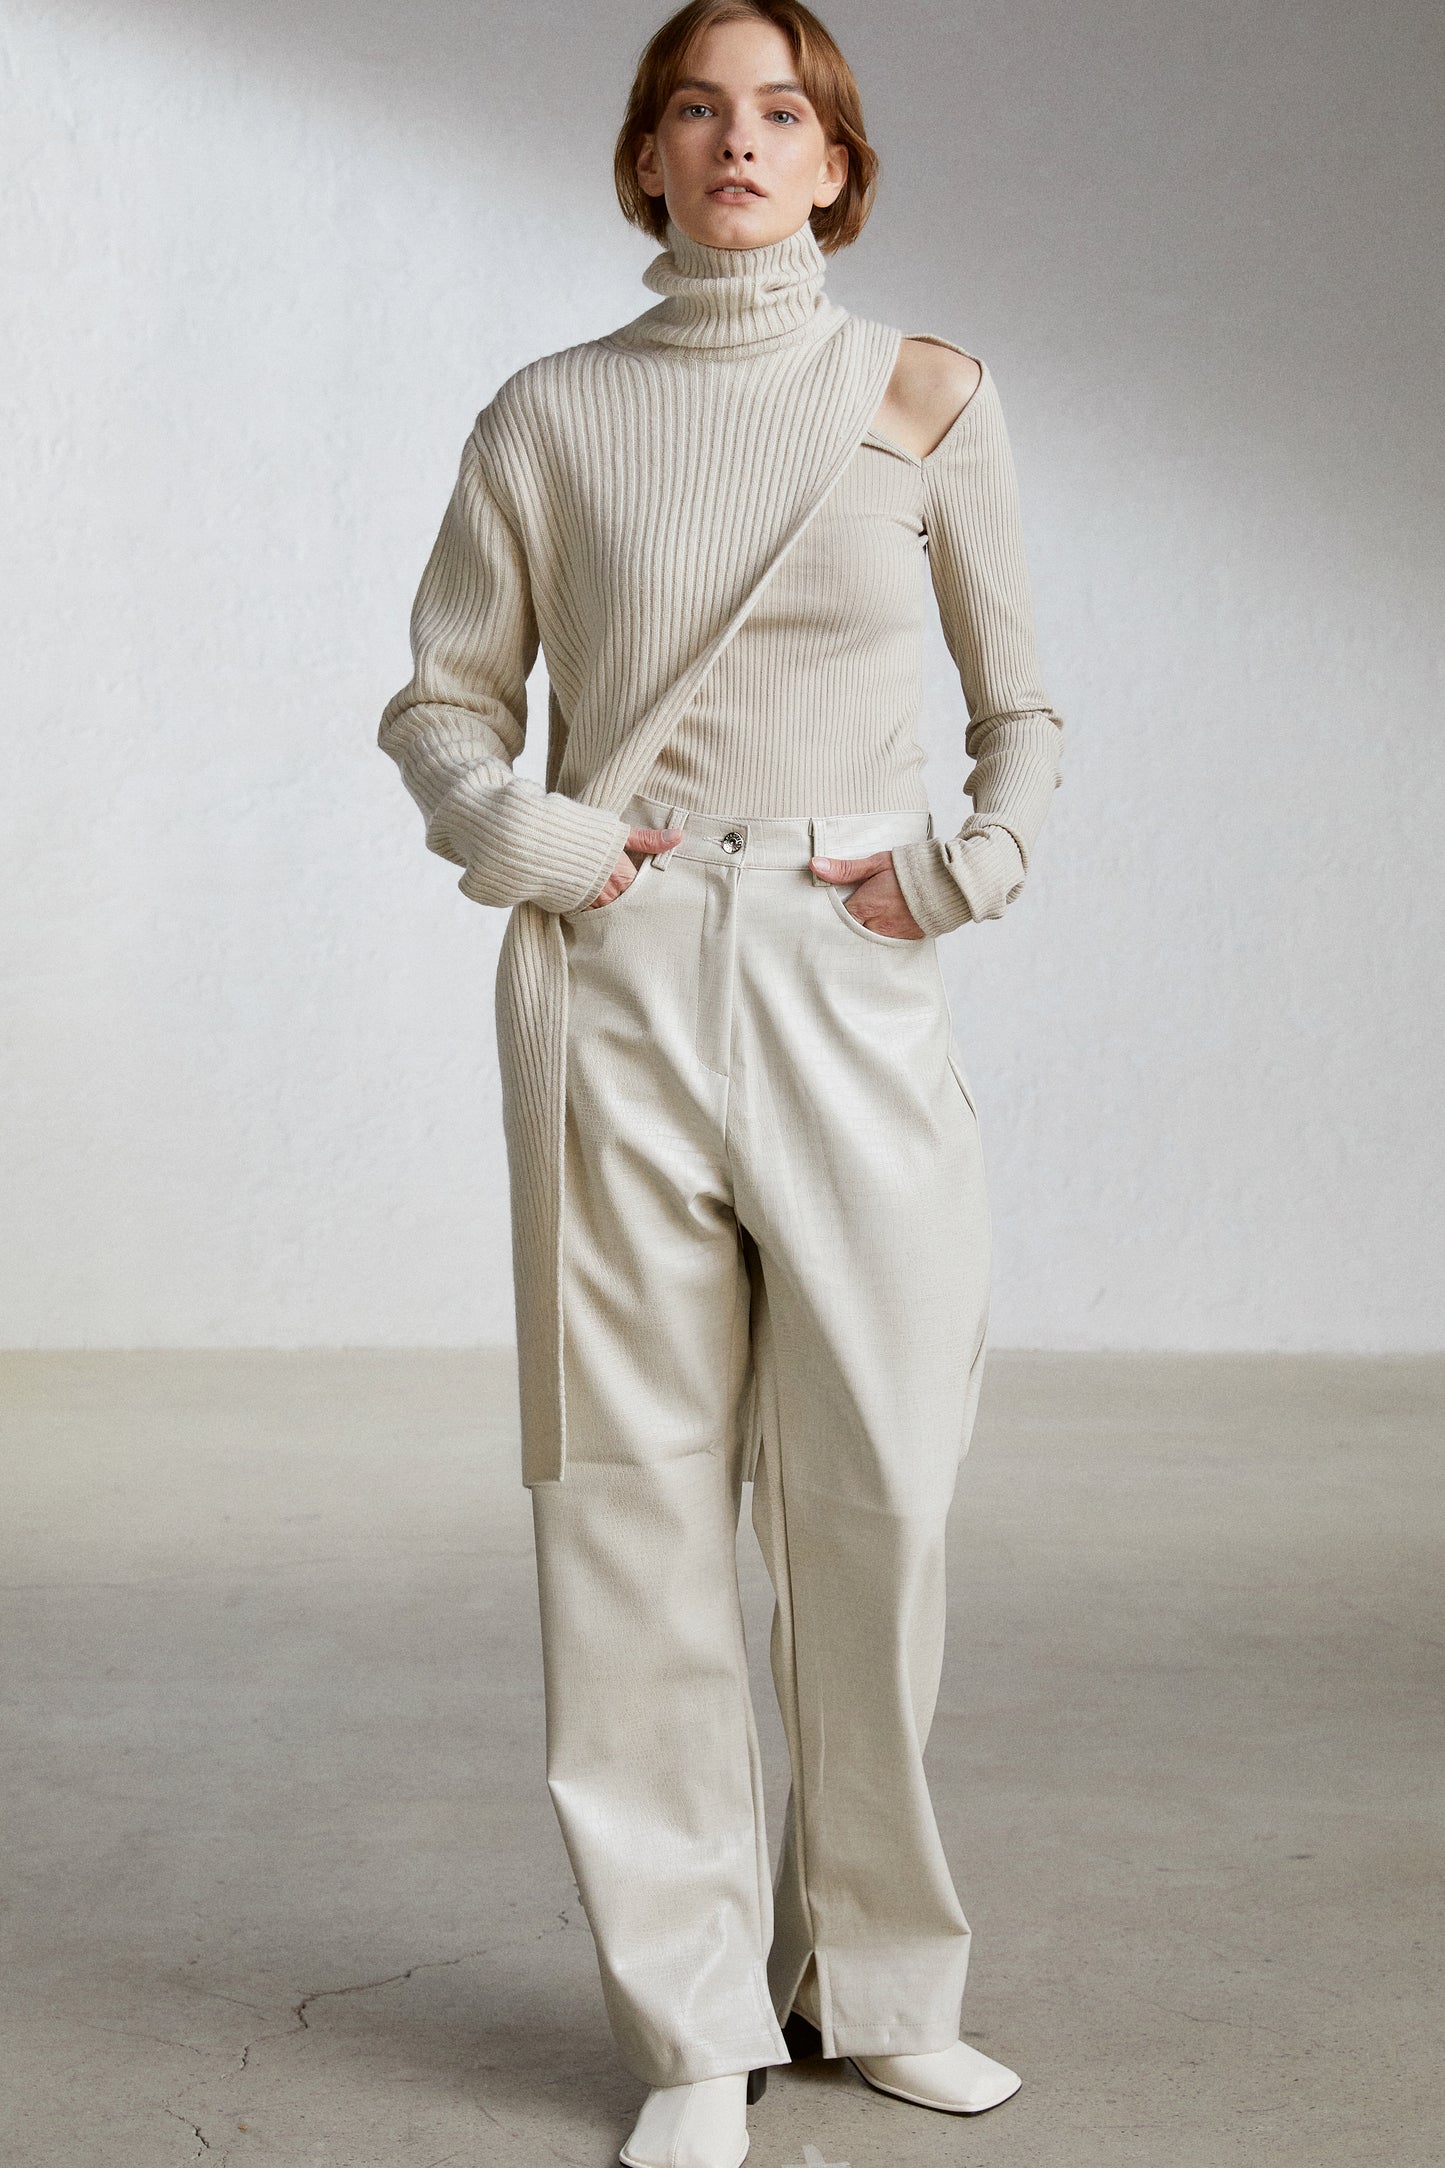 One-Shoulder Sleeve Extra Fine Wool Knit, Ivory